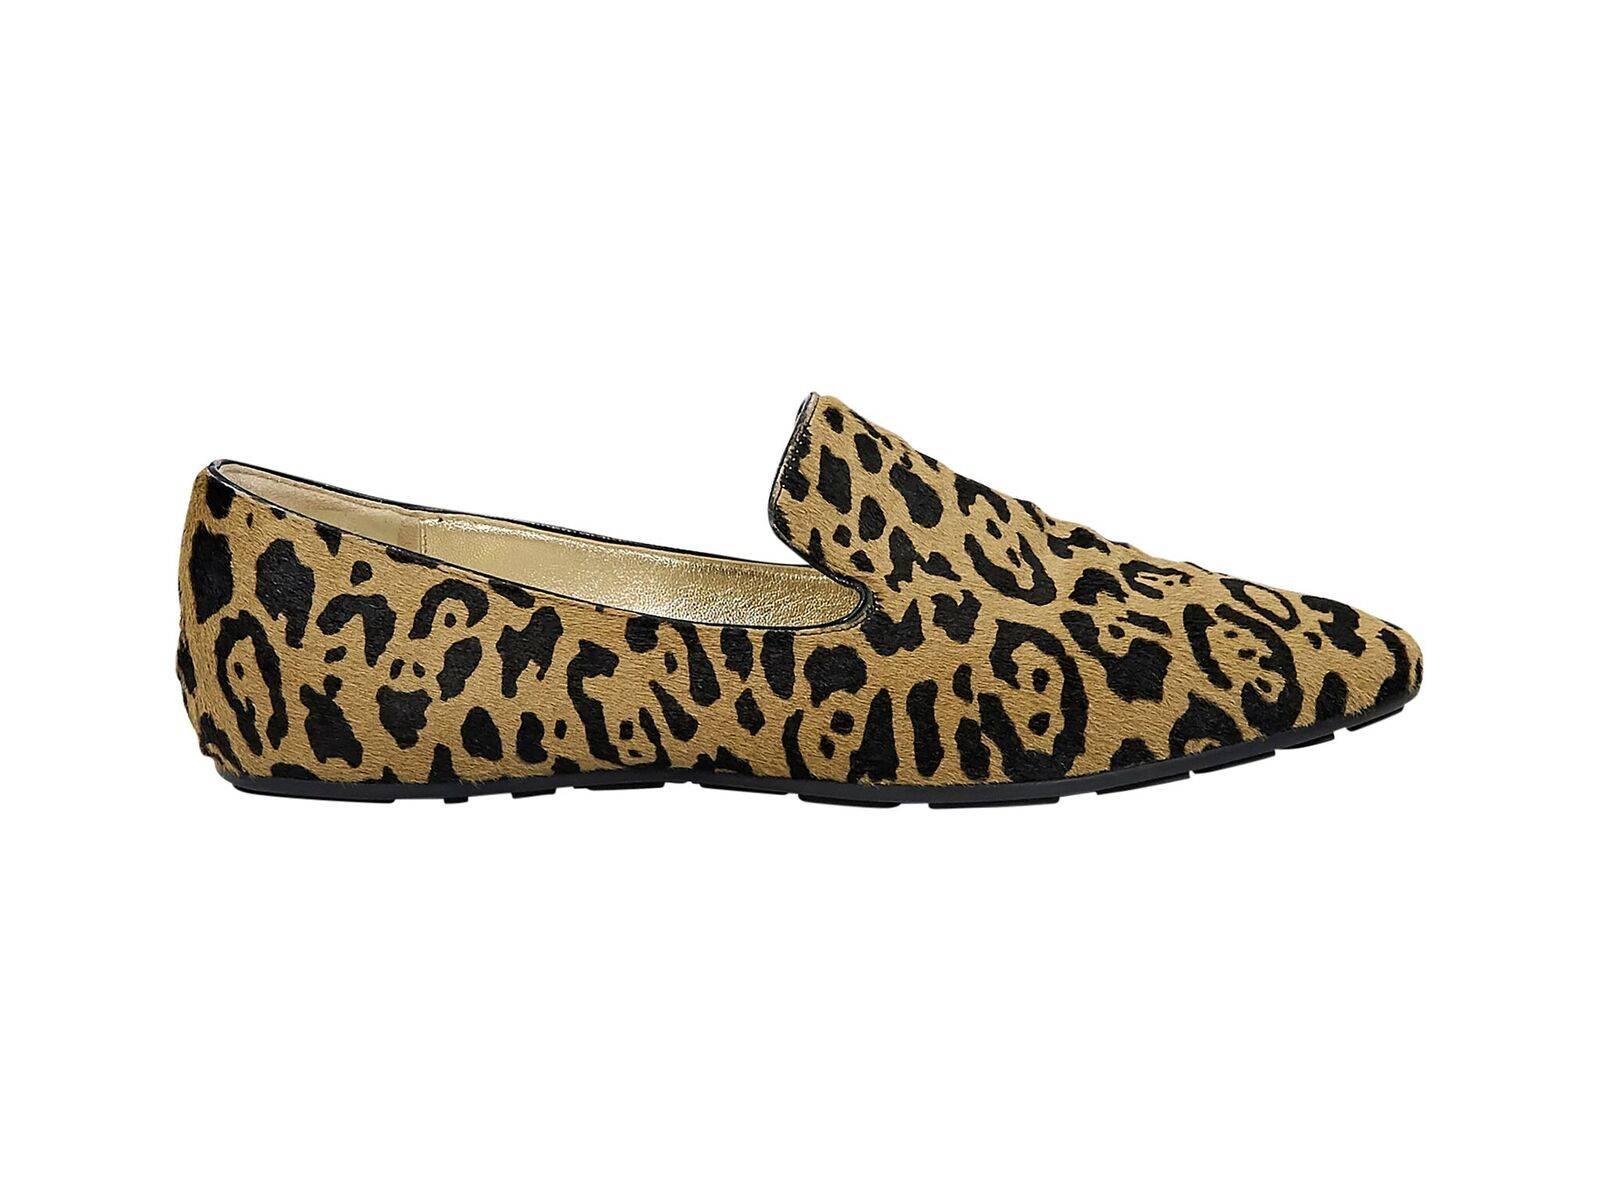 Product details:  Multicolor leopard-print pony hair loafers by Jimmy Choo.  Round toe.  Slip-on style. 
Condition: Pre-owned. Very good.
Est. Retail $855